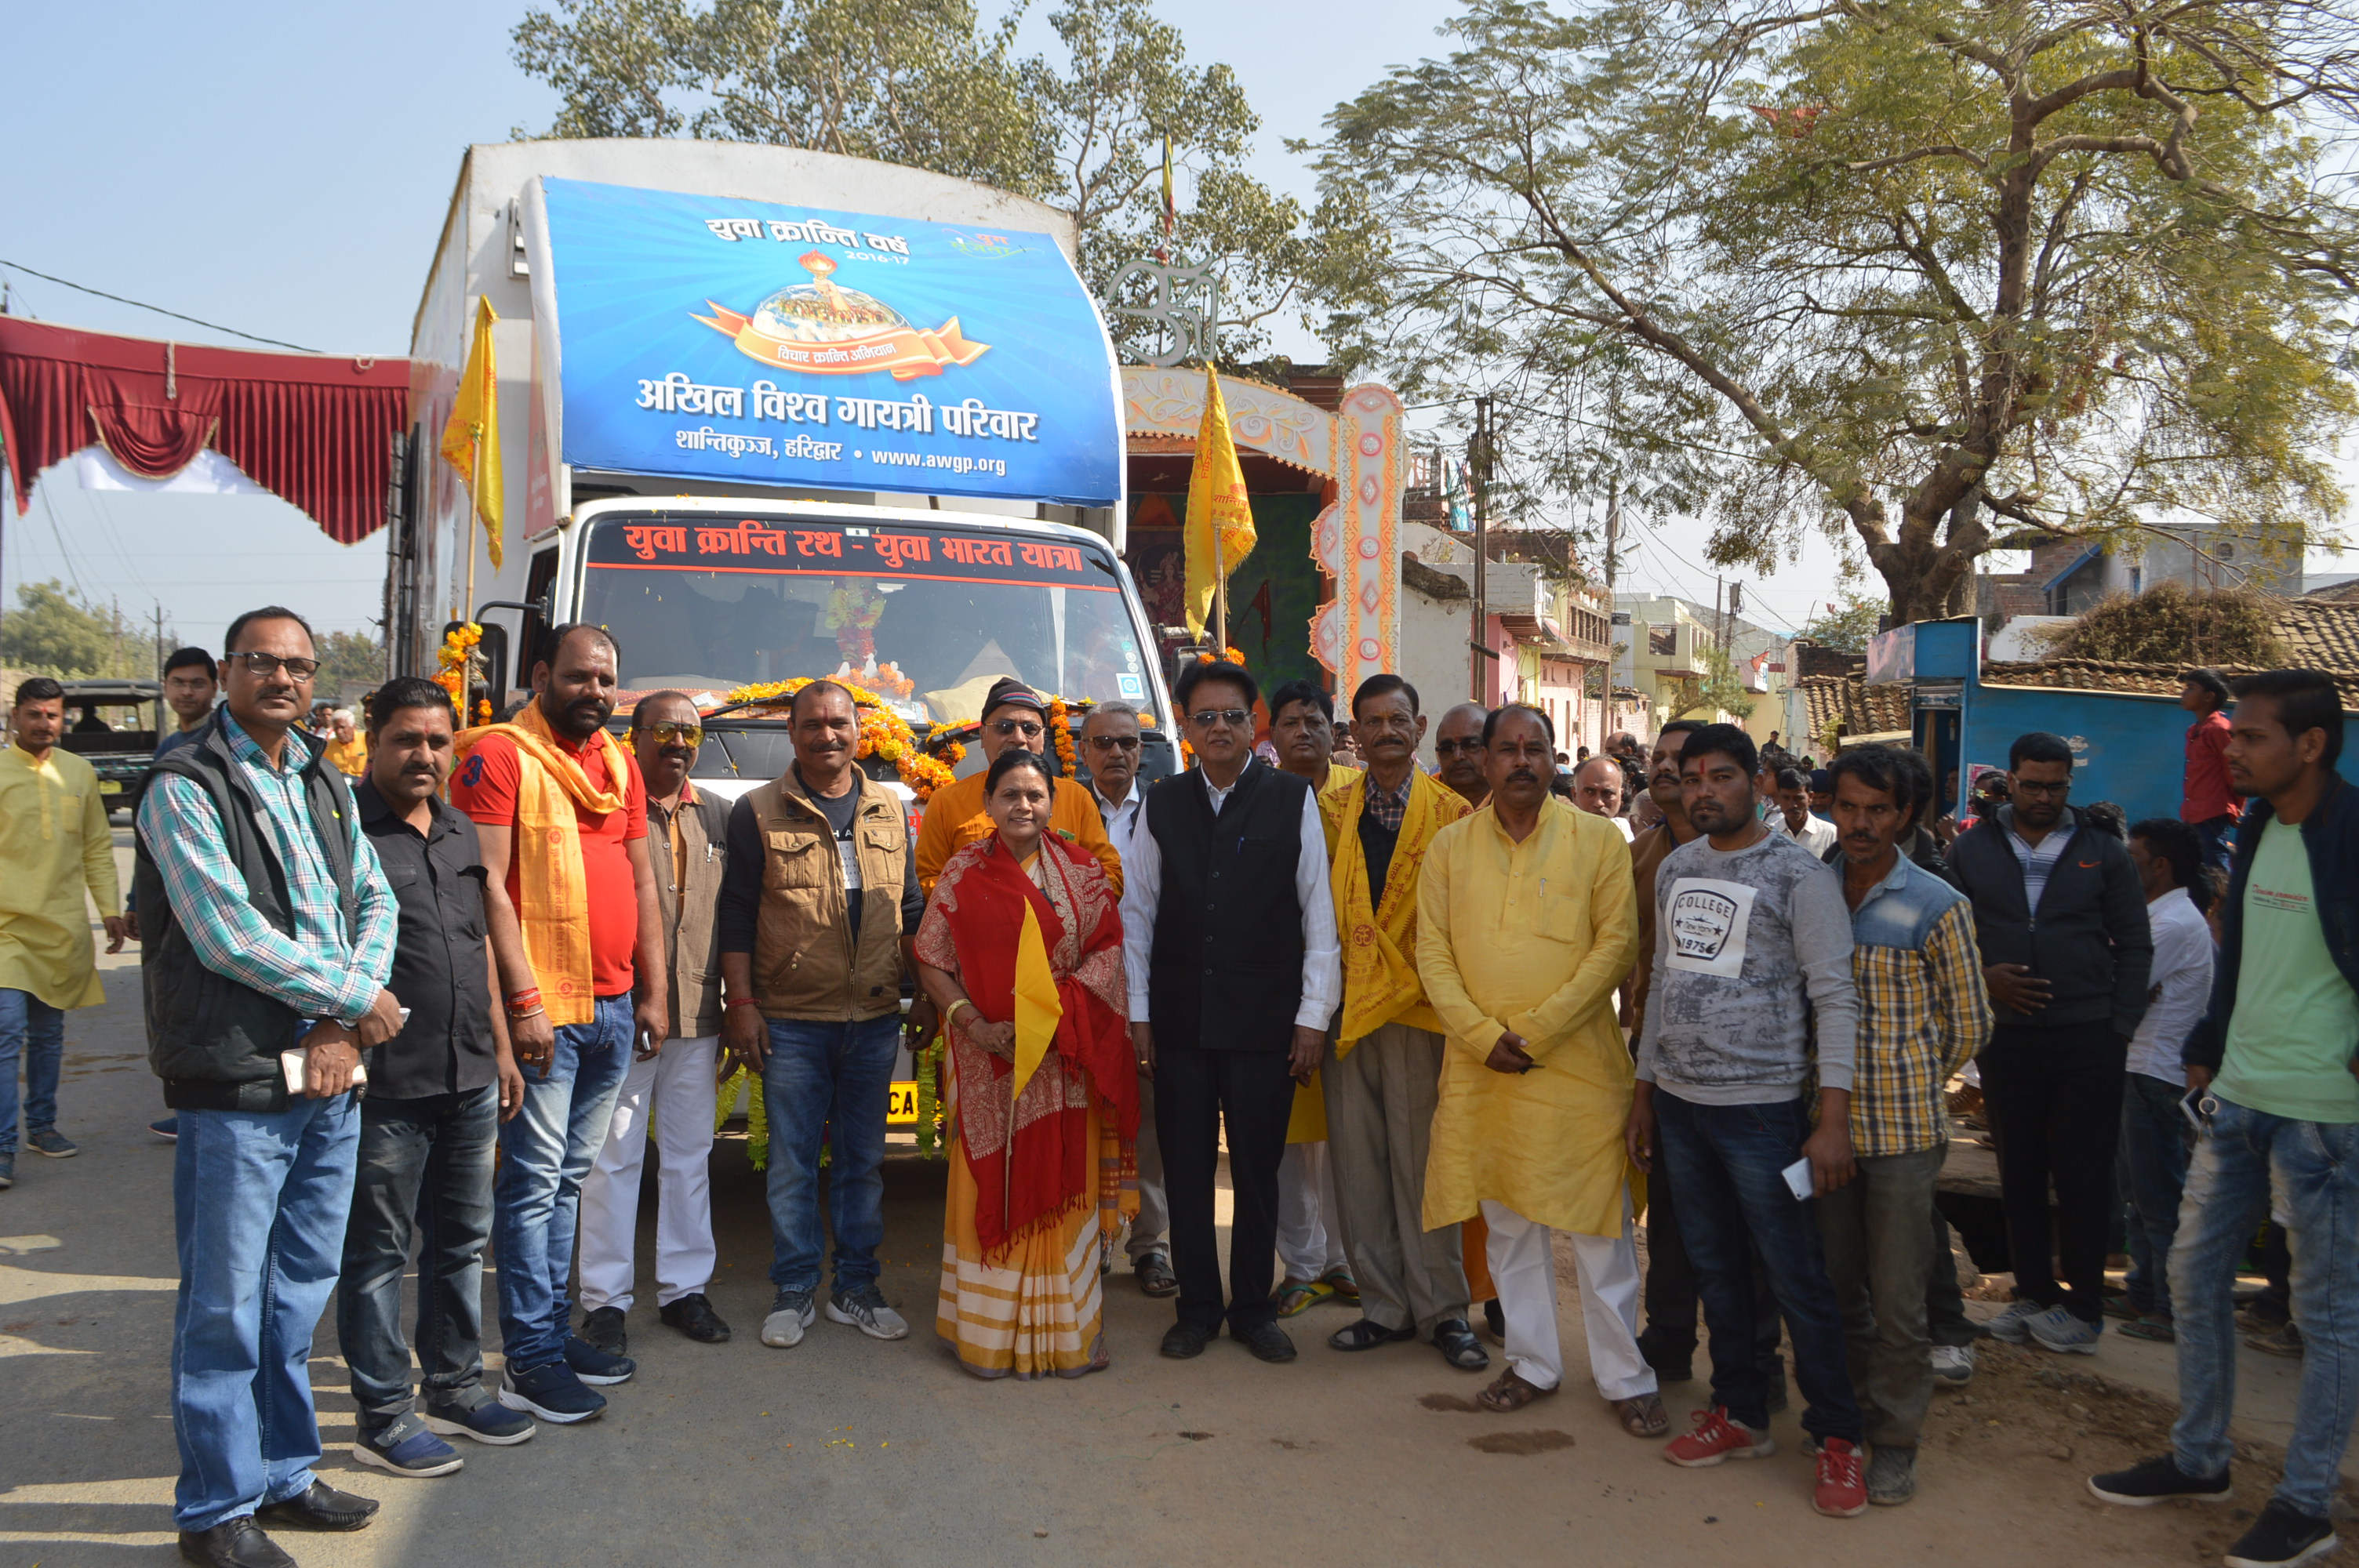 Youth revolution of Gayatri family reached the chariot Damoh